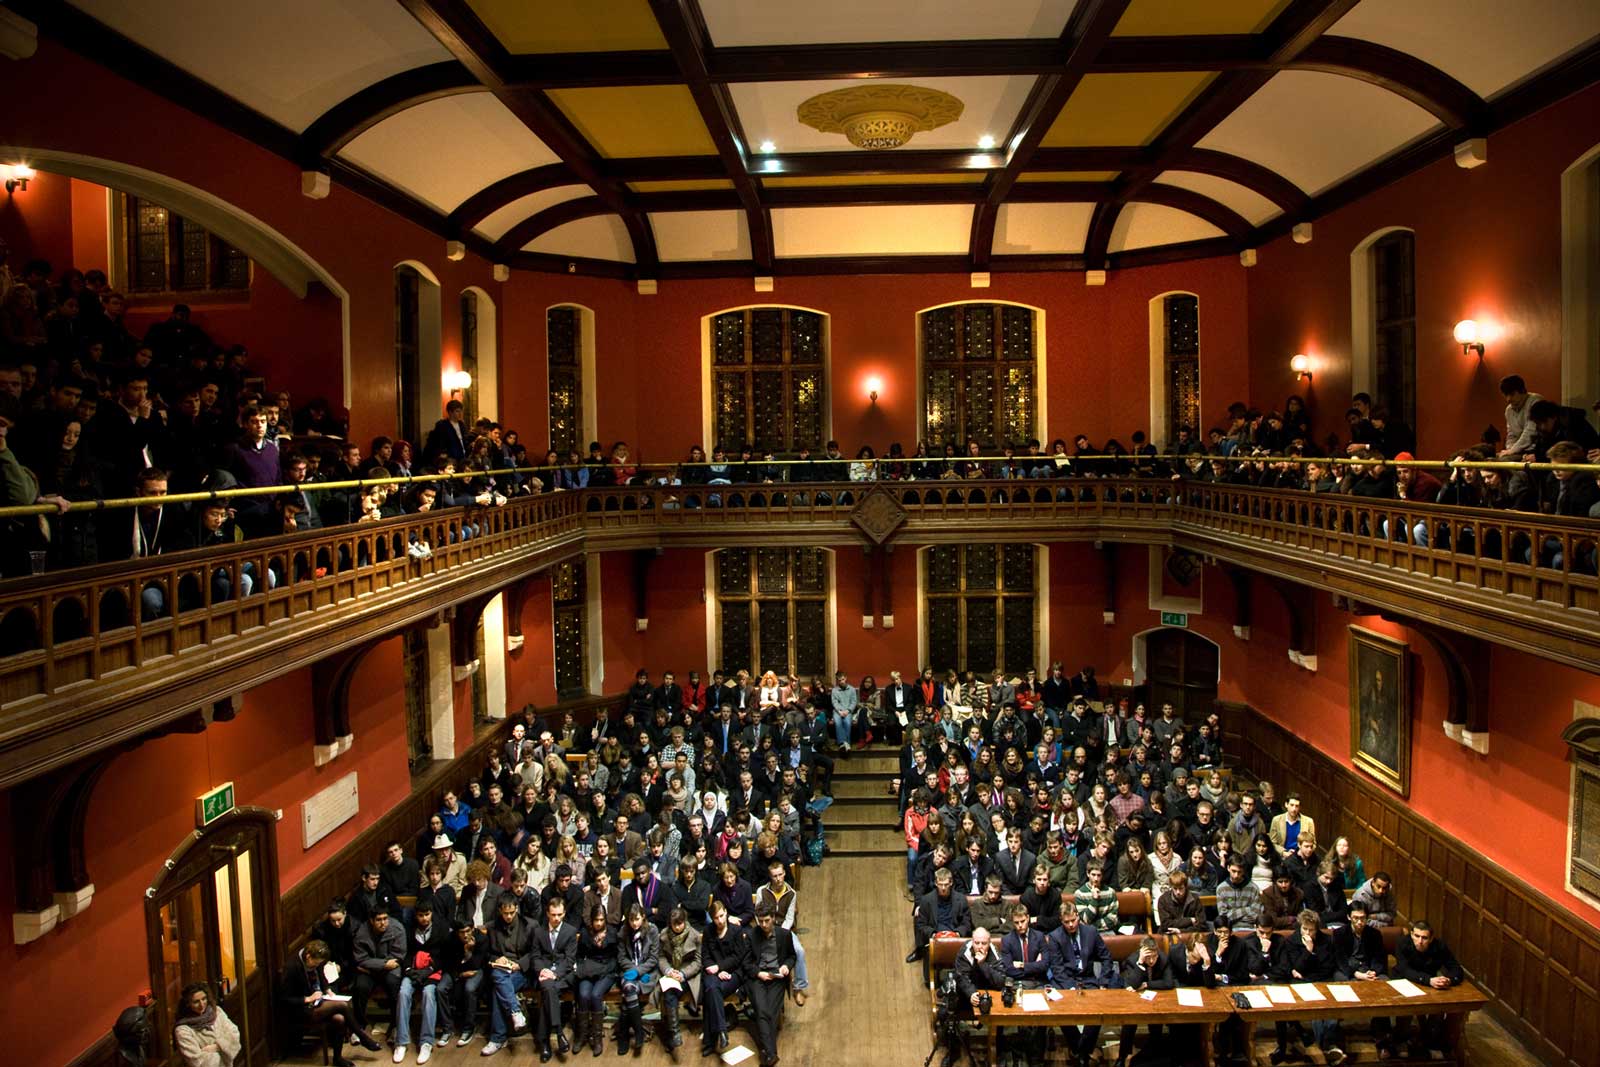 The Oxford Union Debating Chamber